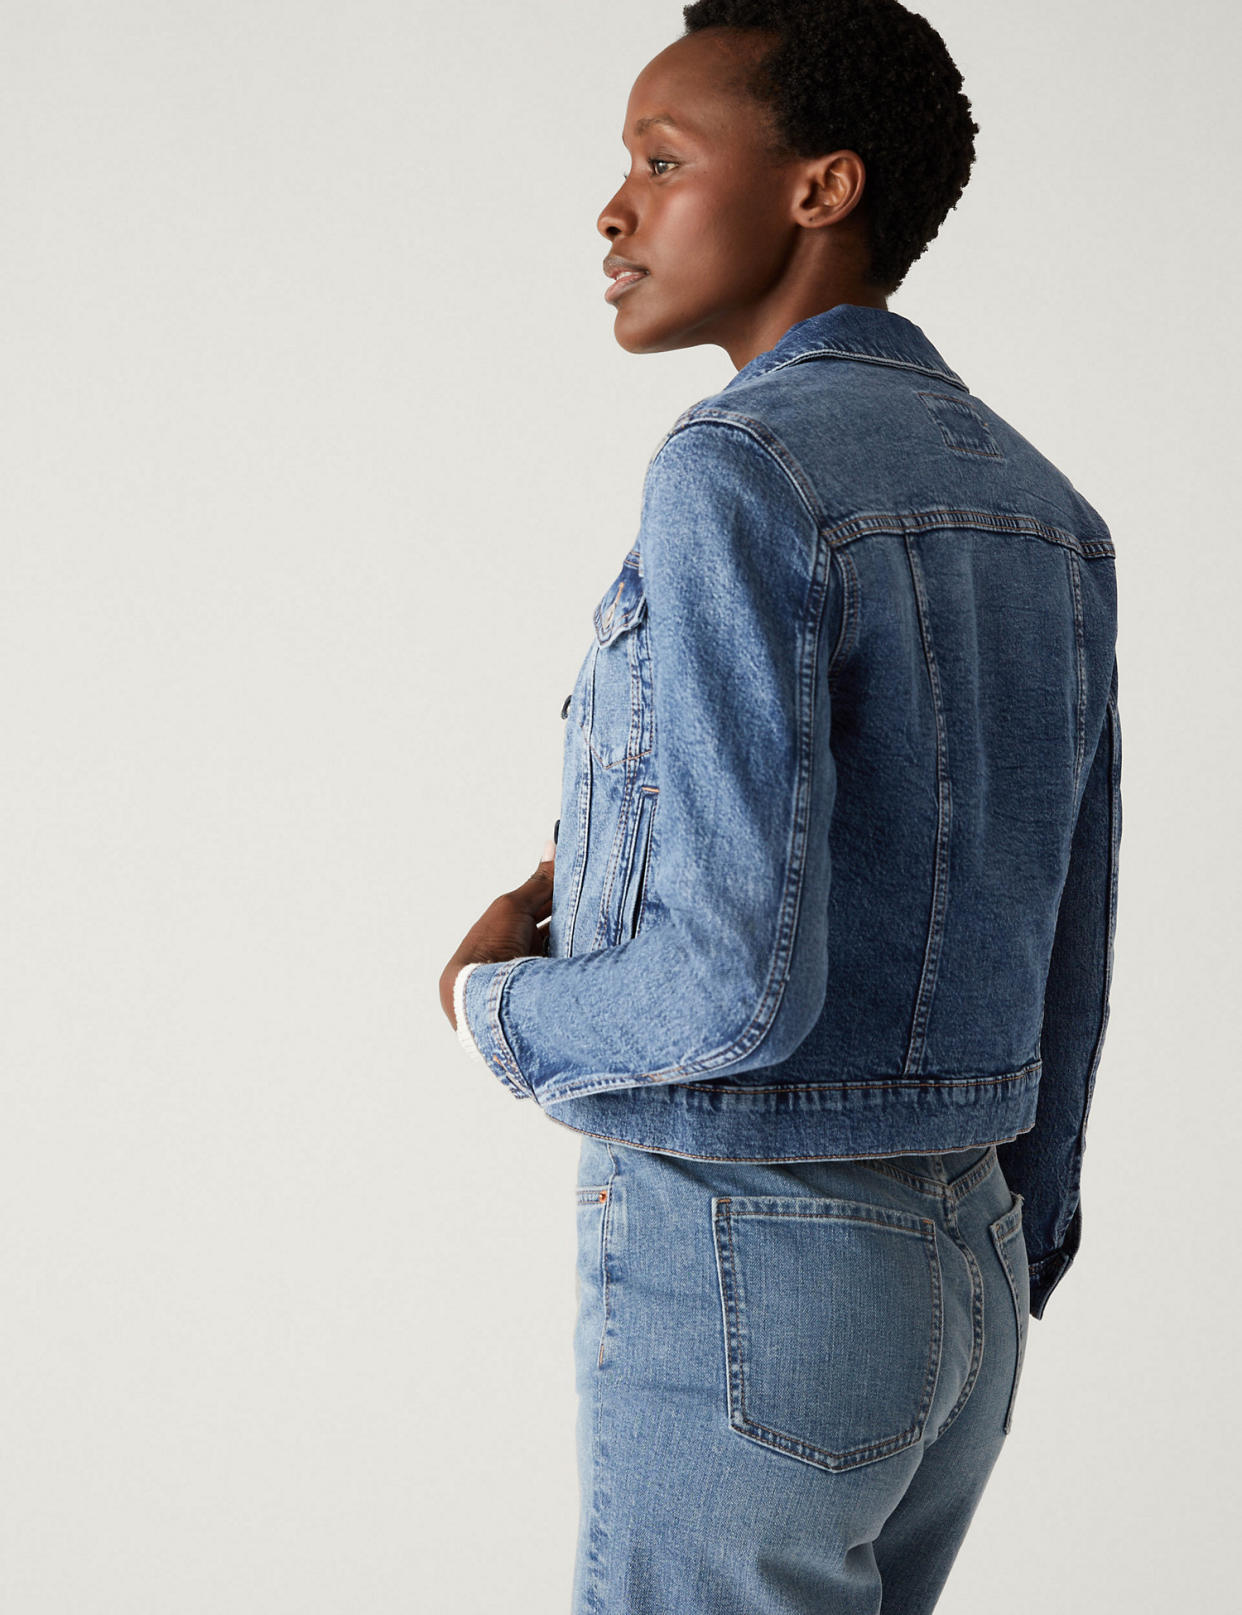 M&S shoppers claim this is the best denim jacket on the market. And we have to agree. (Marks & Spencer)